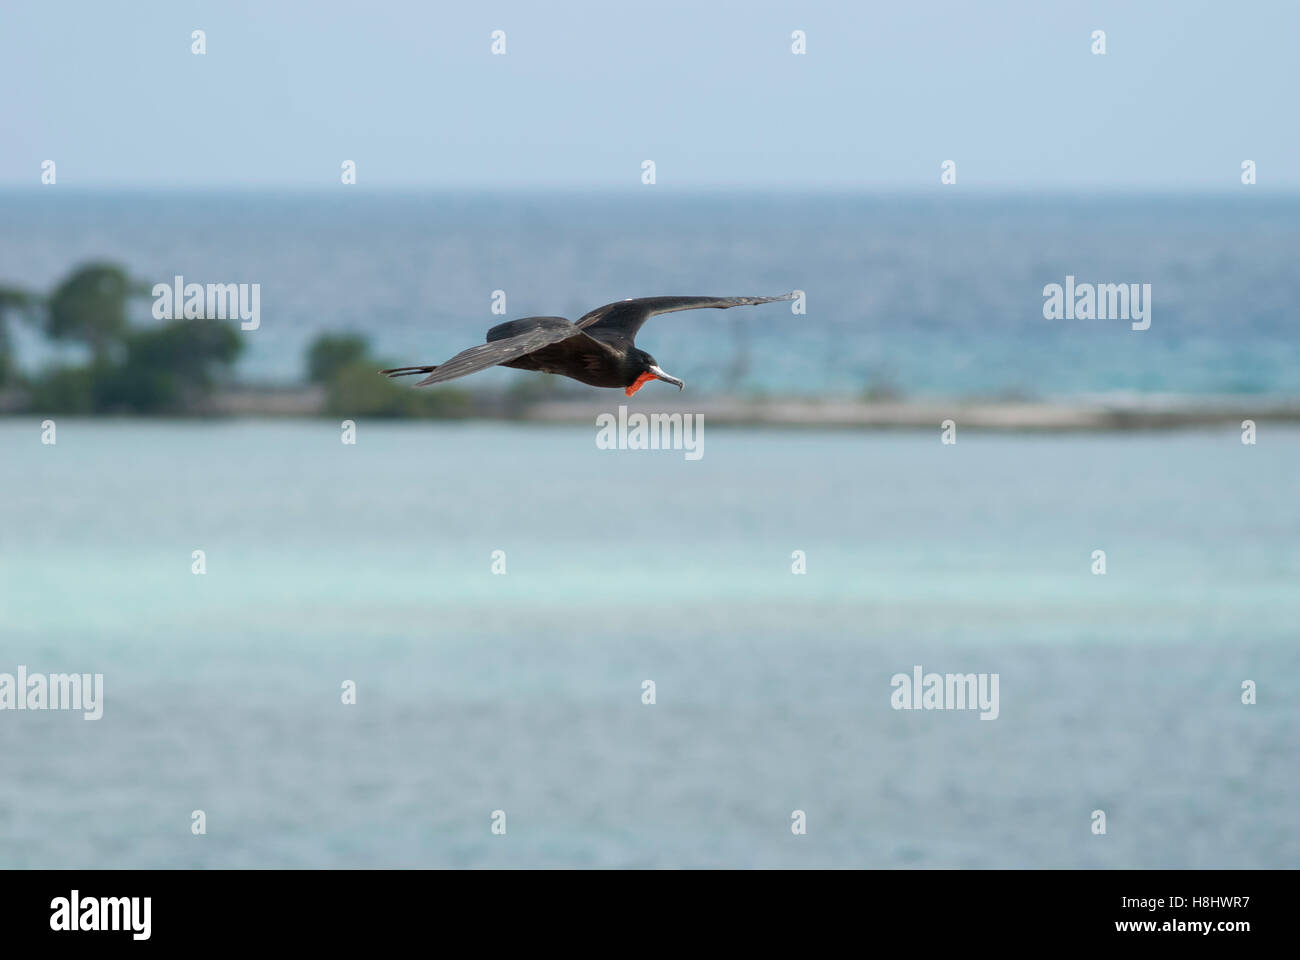 Magnificent frigate bird in flight over a tropical island: Dry Tortugas National Park. Stock Photo